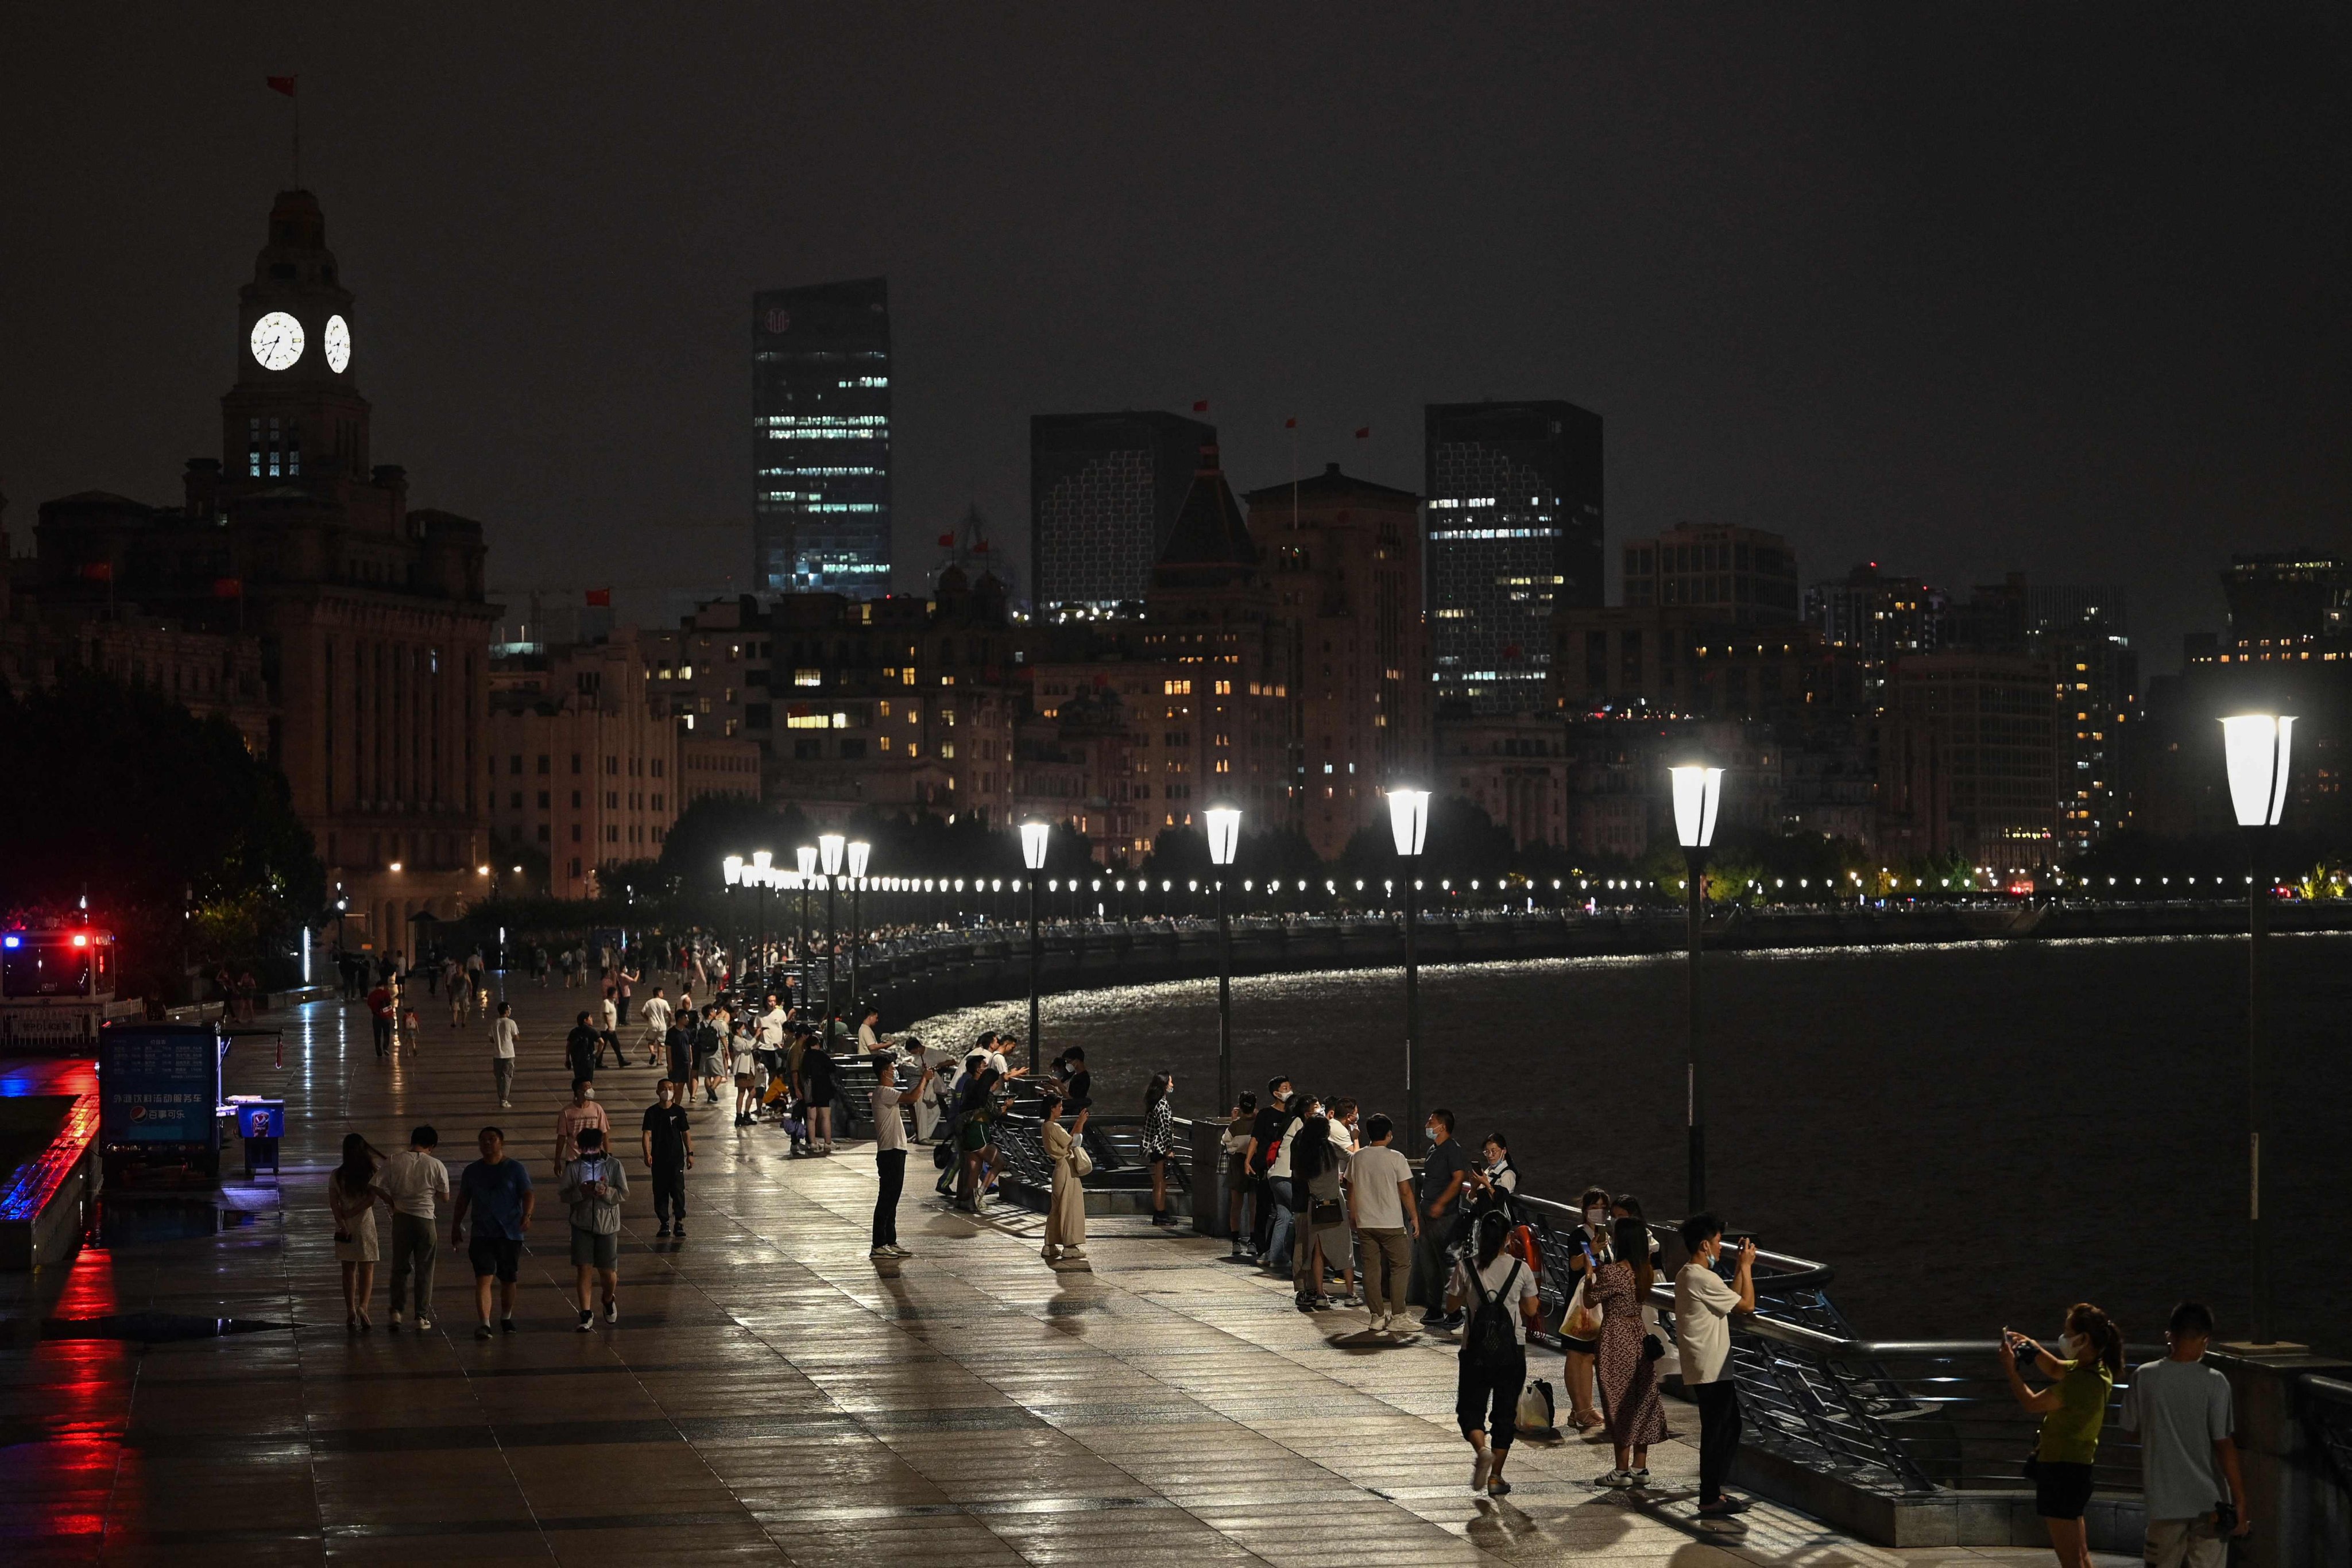 People walk along The Bund promenade as decorative lights are switched off to save energy in Shanghai on Tuesday. Photo: AFP